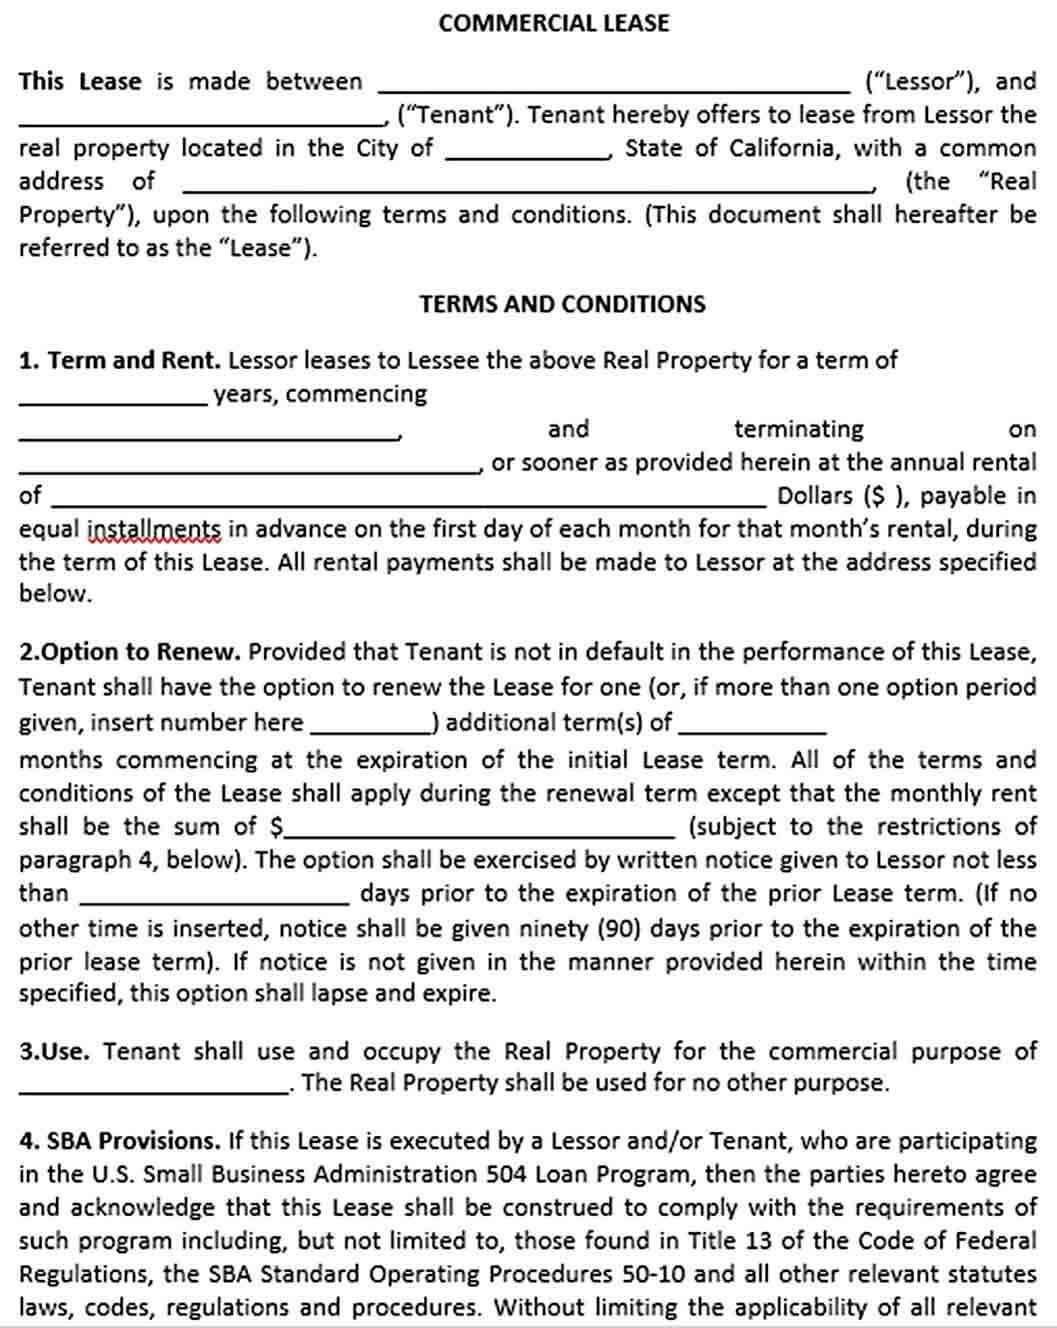 Sample Commercial Real Estate Lease Agreement Template